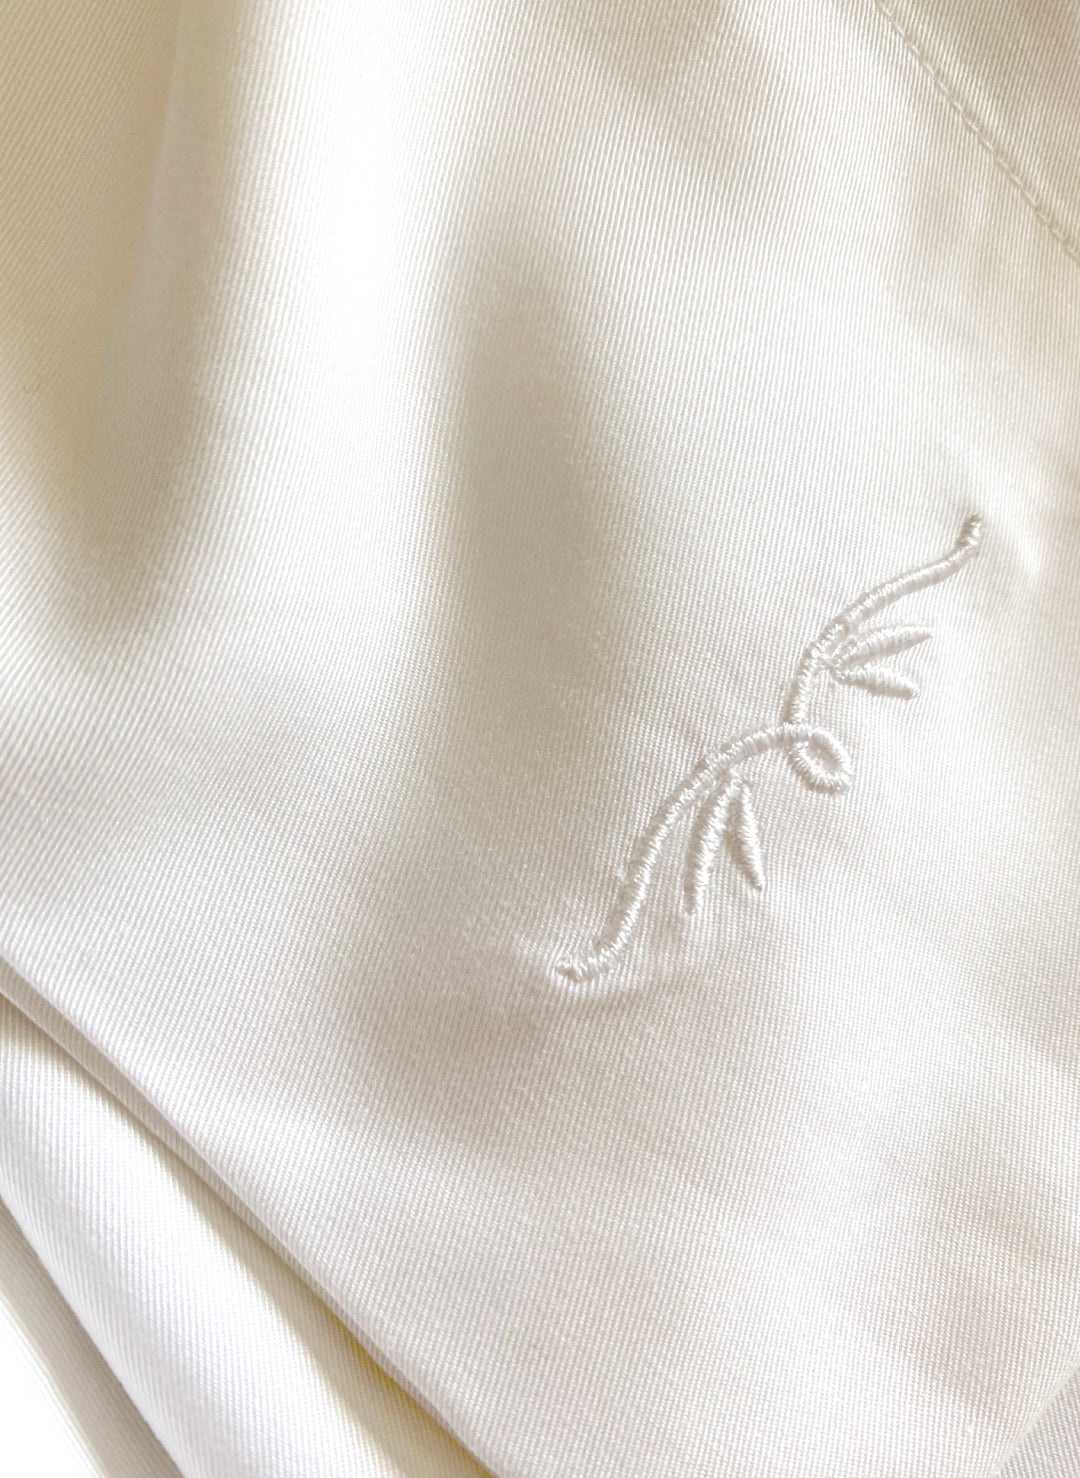 bedvoyage embroidered logo on white bamboo sheets